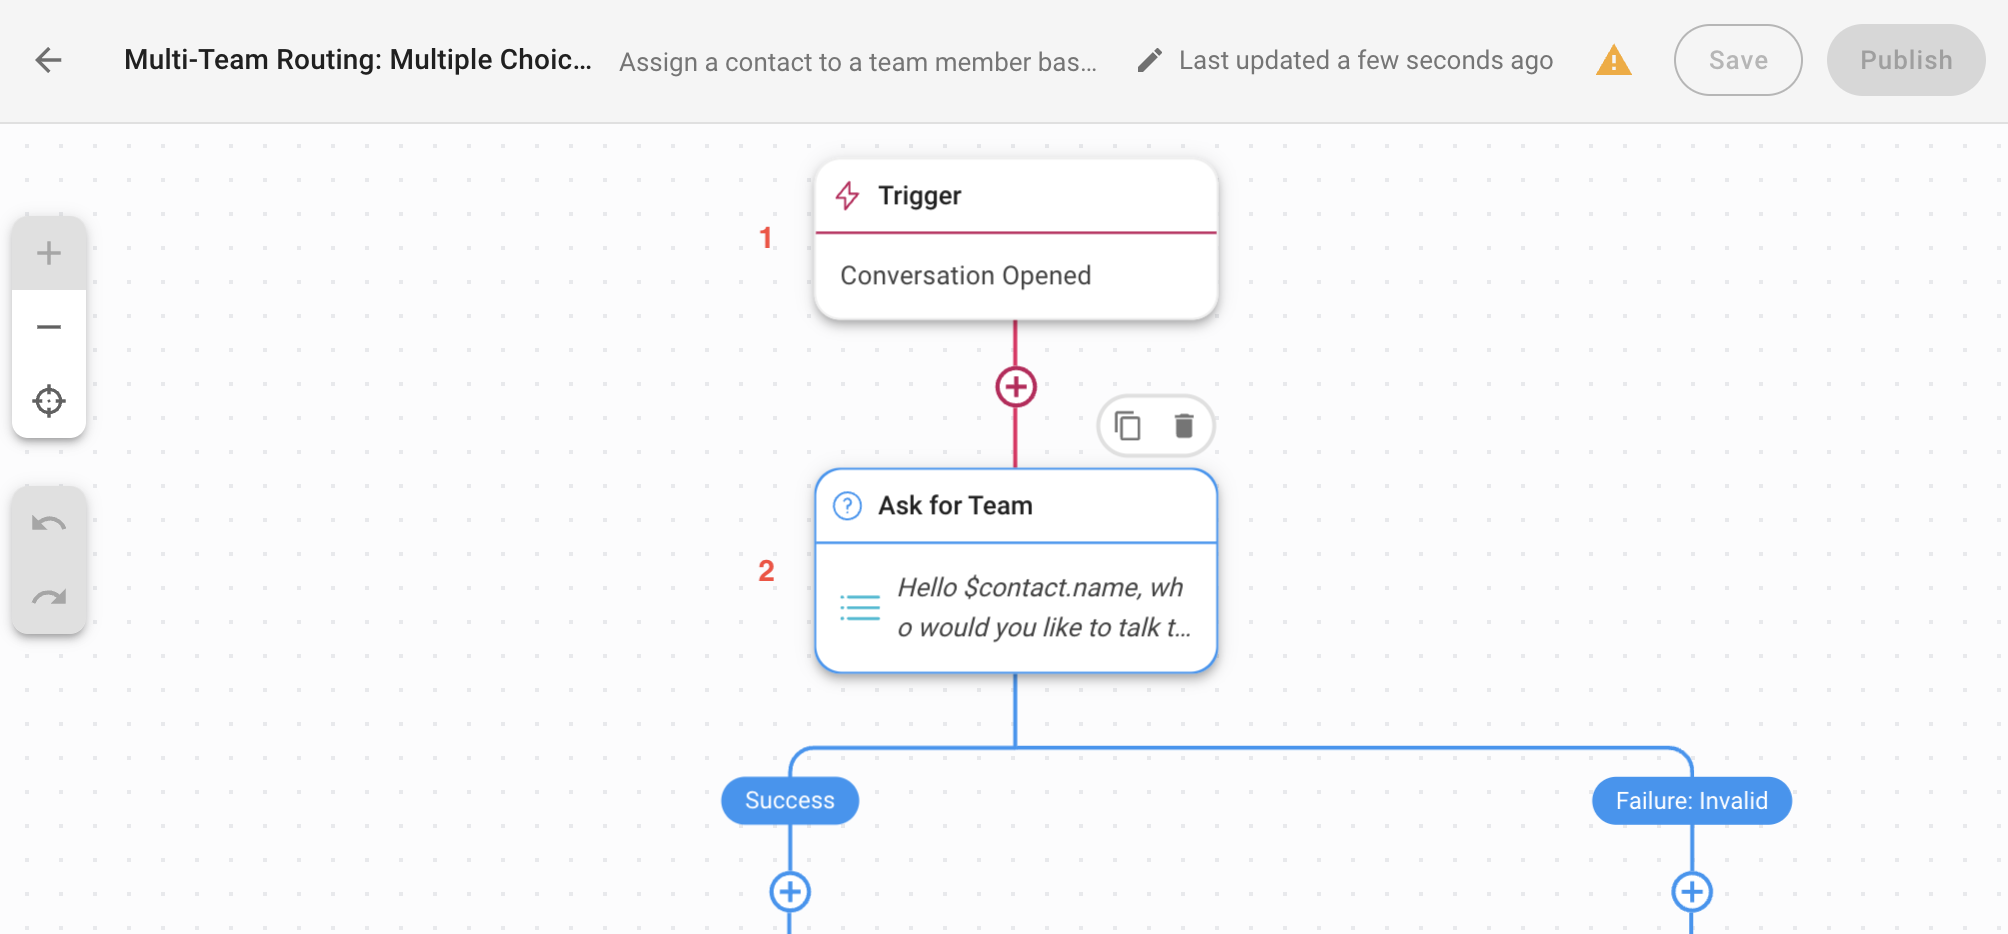 Multi-Team Routing: Multiple Choice Workflow Template